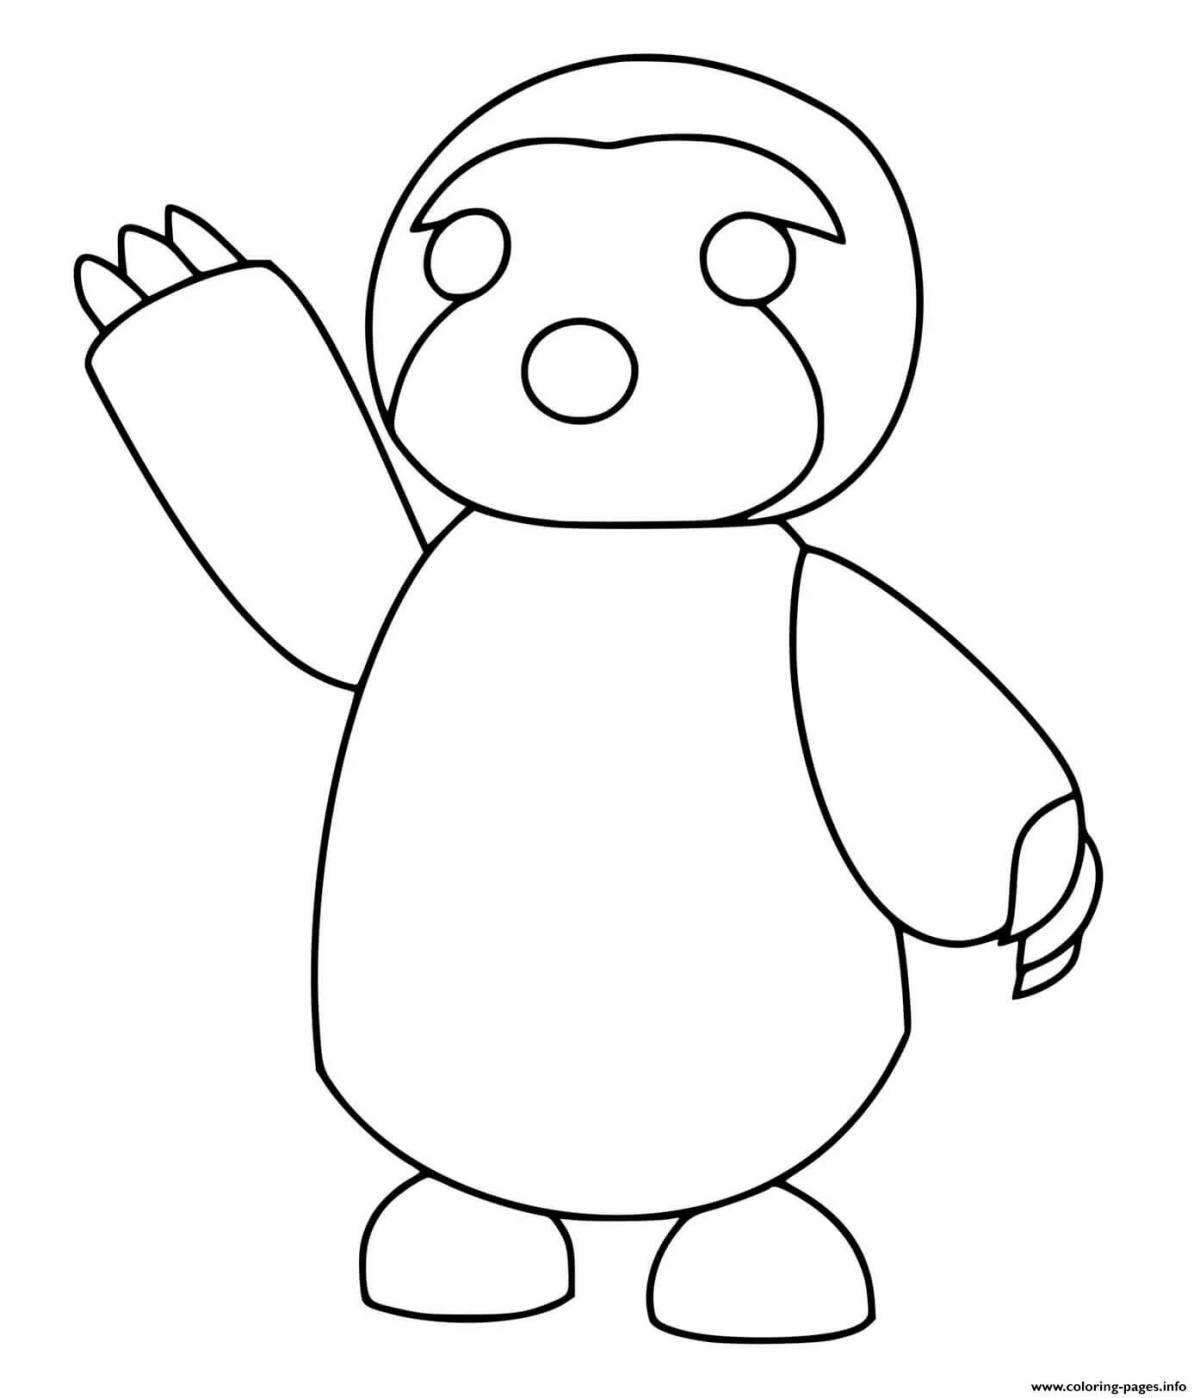 Snuggable coloring page pets от adopt me